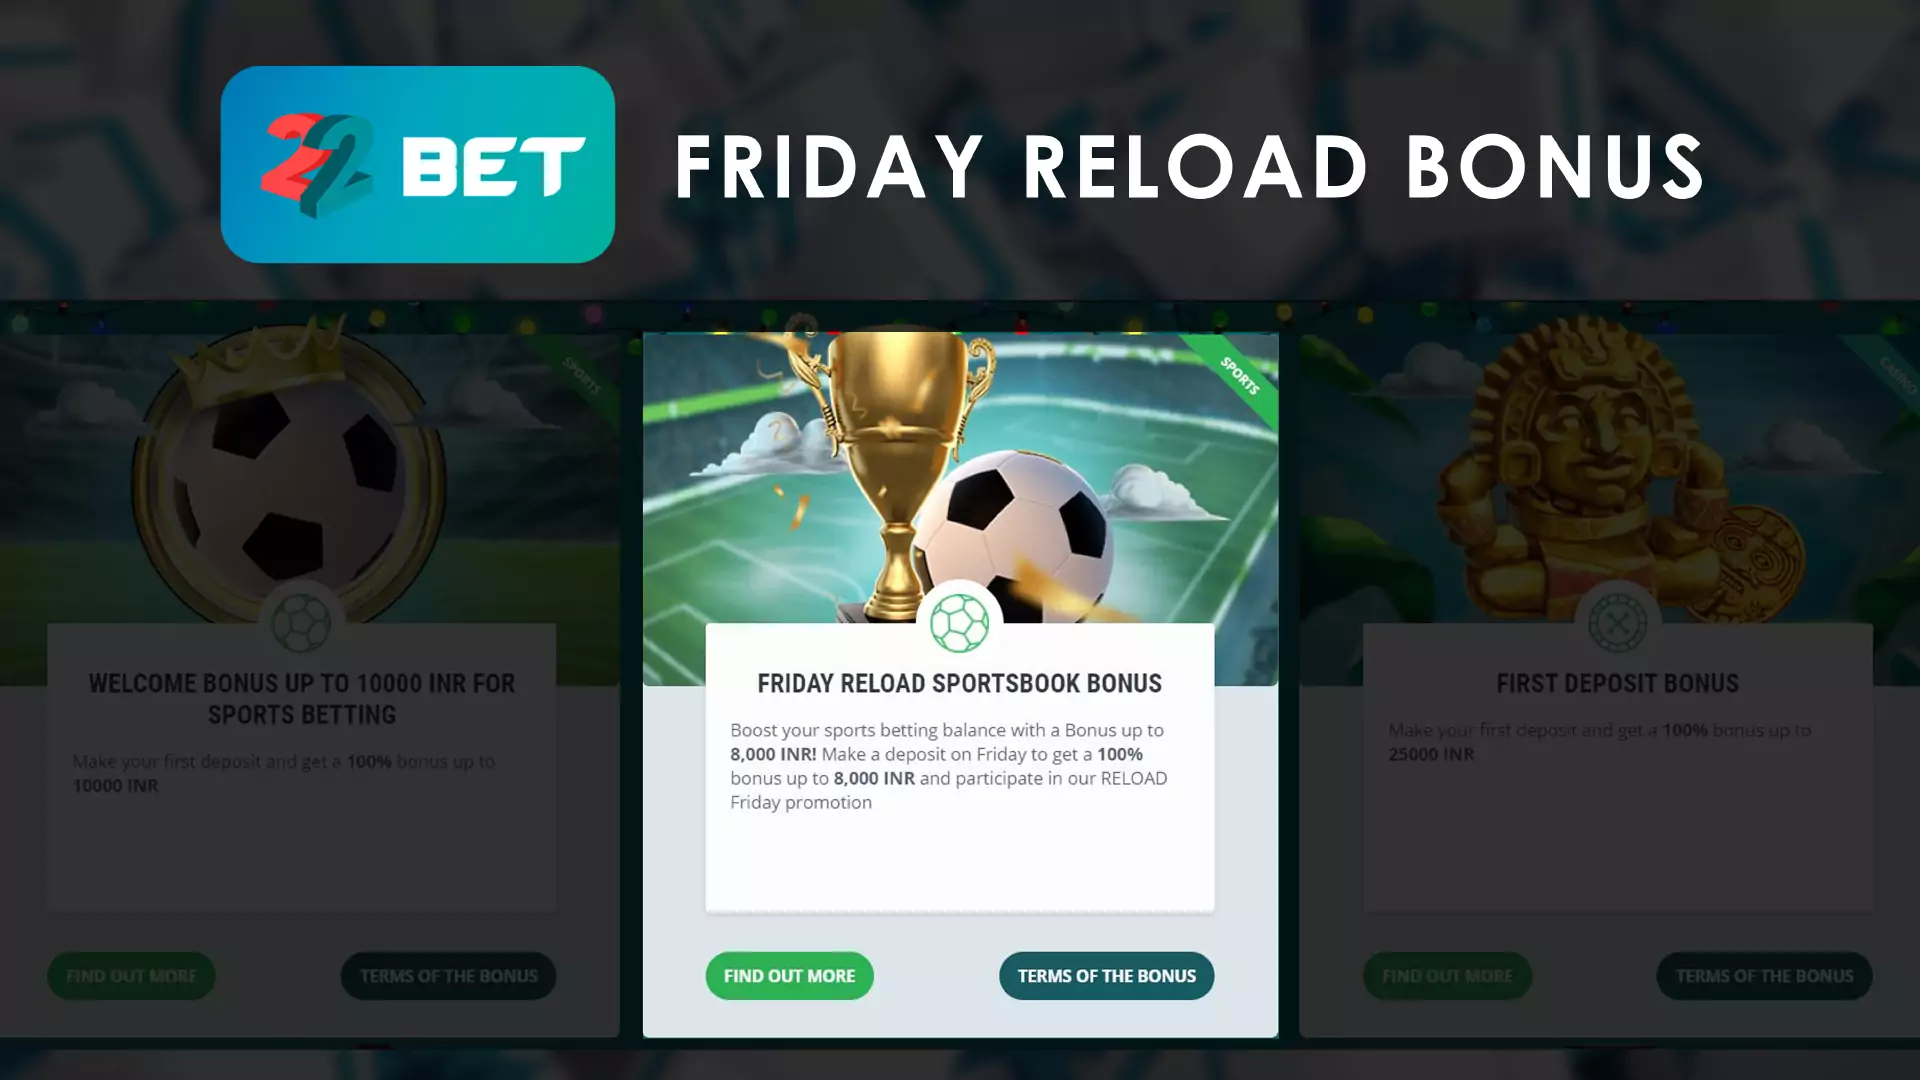 Read more about Friday Reload Bonus in the section of Bonuses on the website.